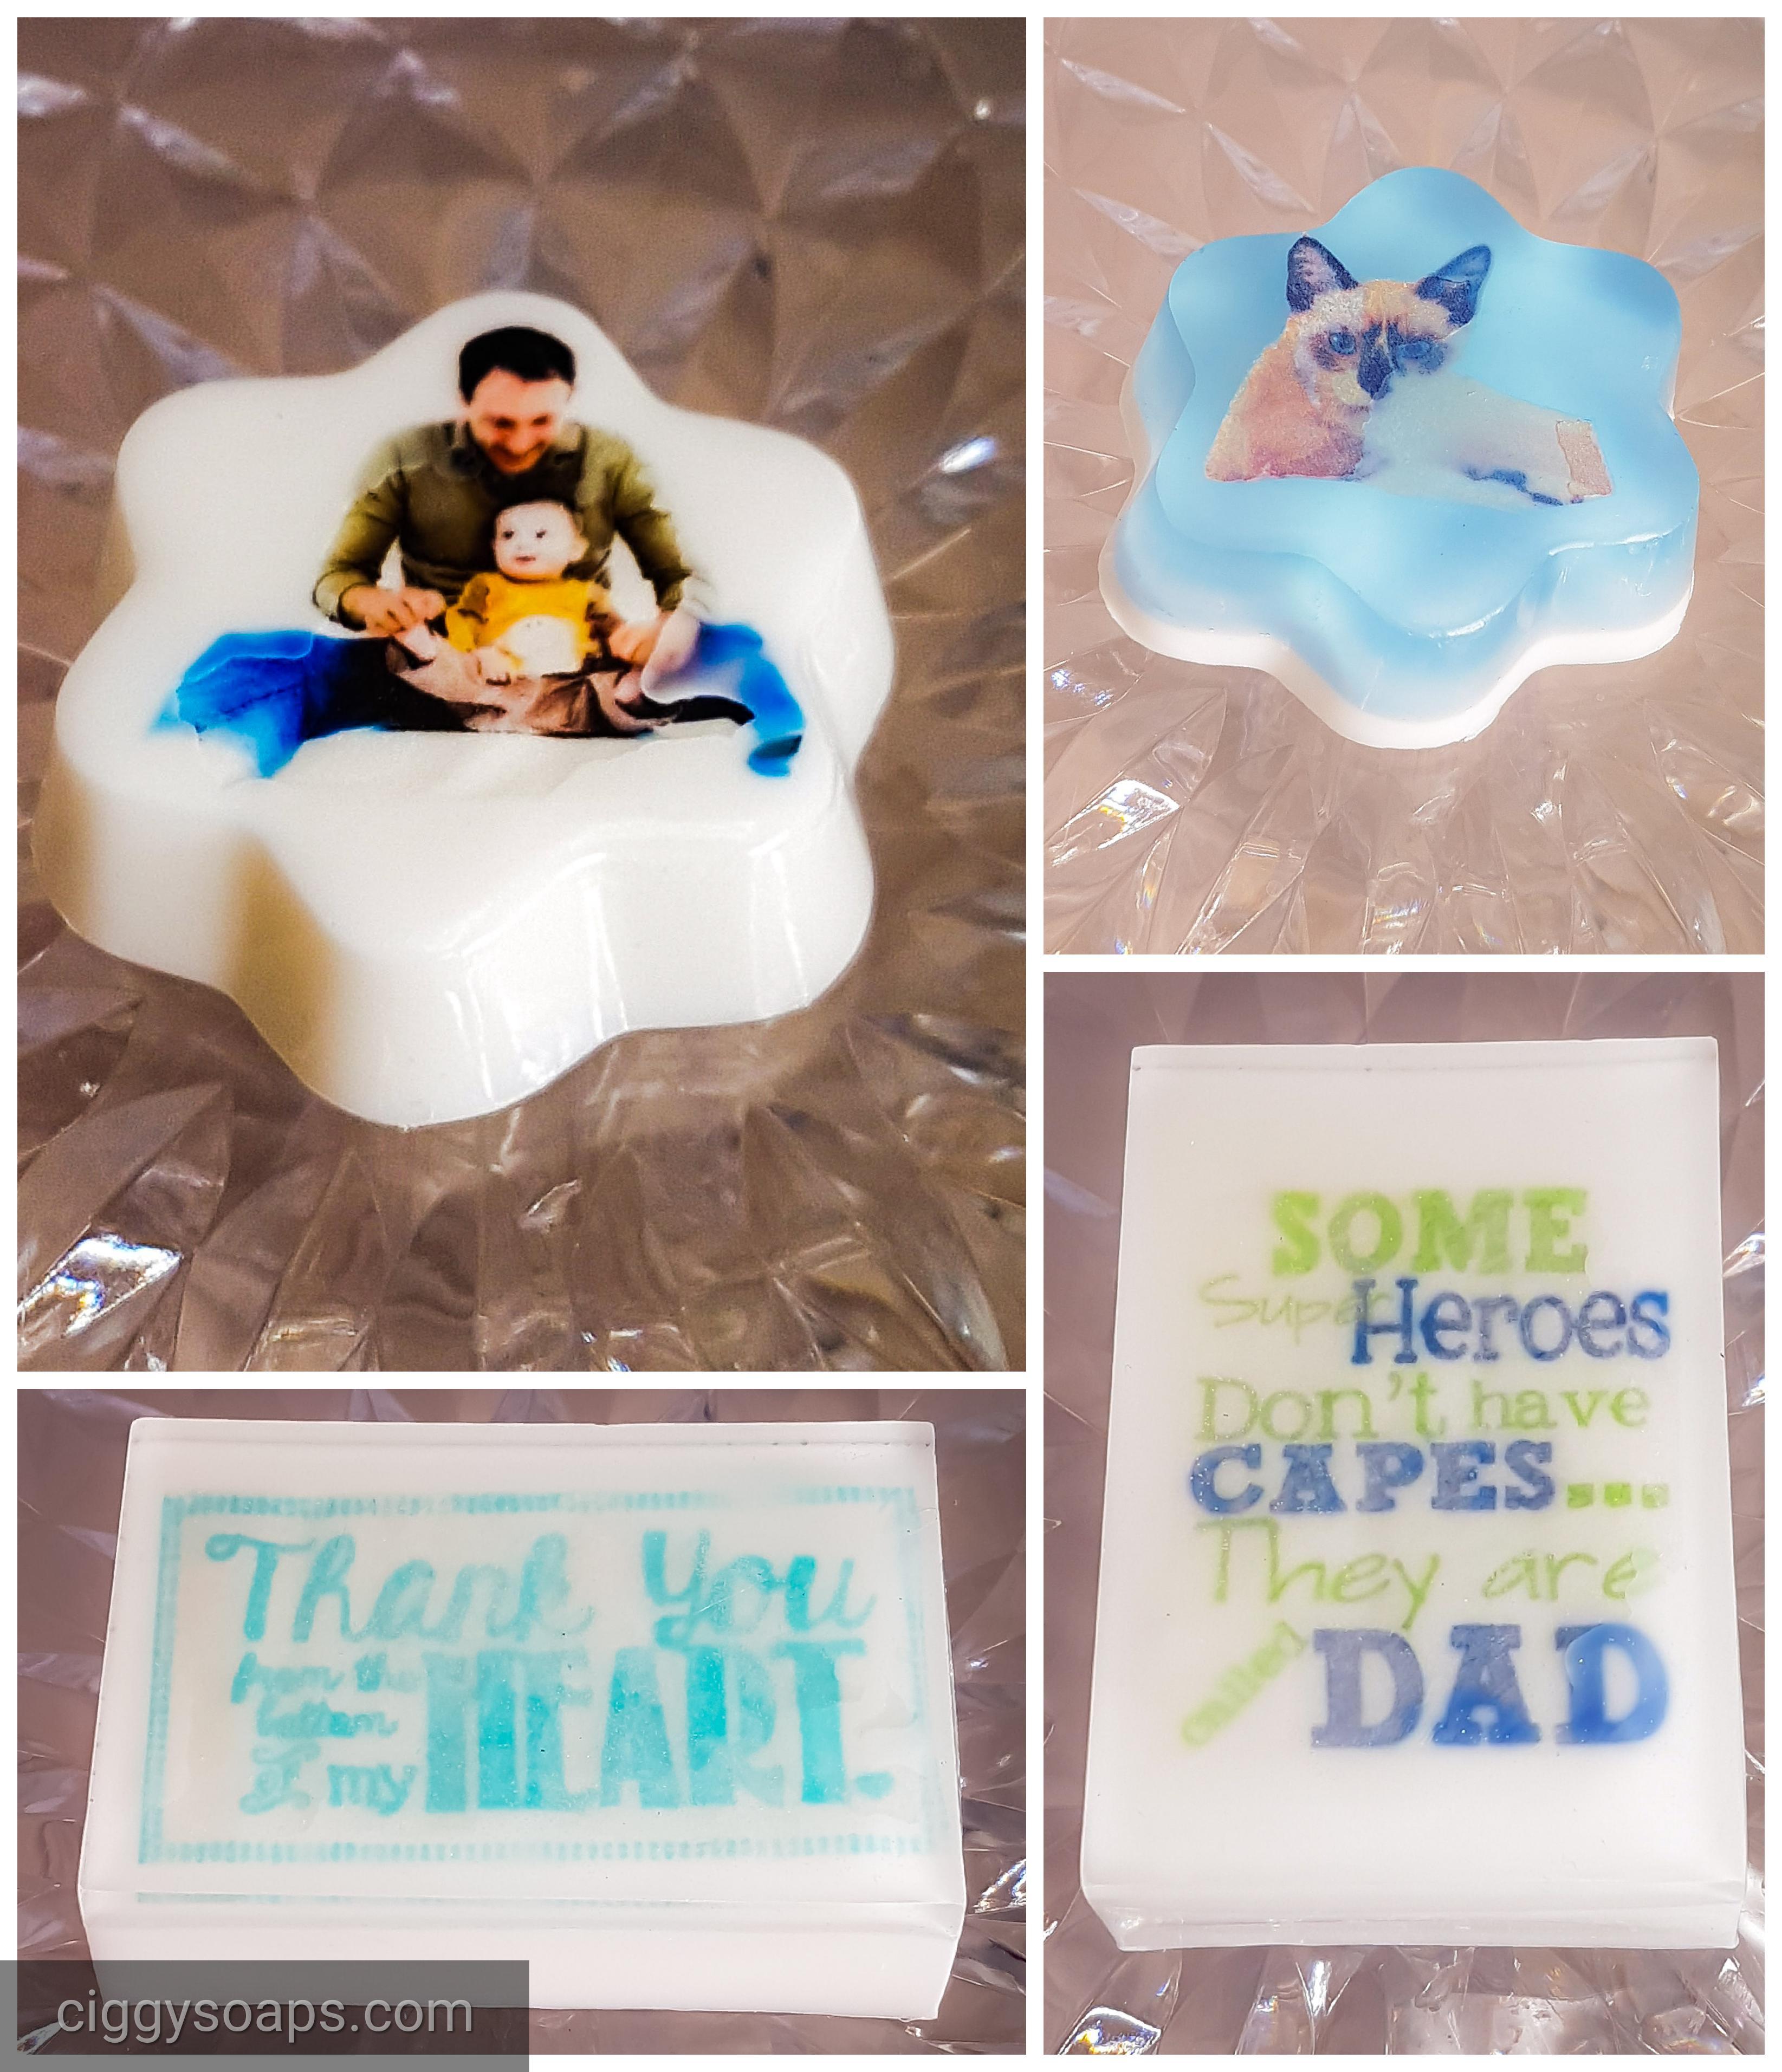 Dadpicpapersoaps